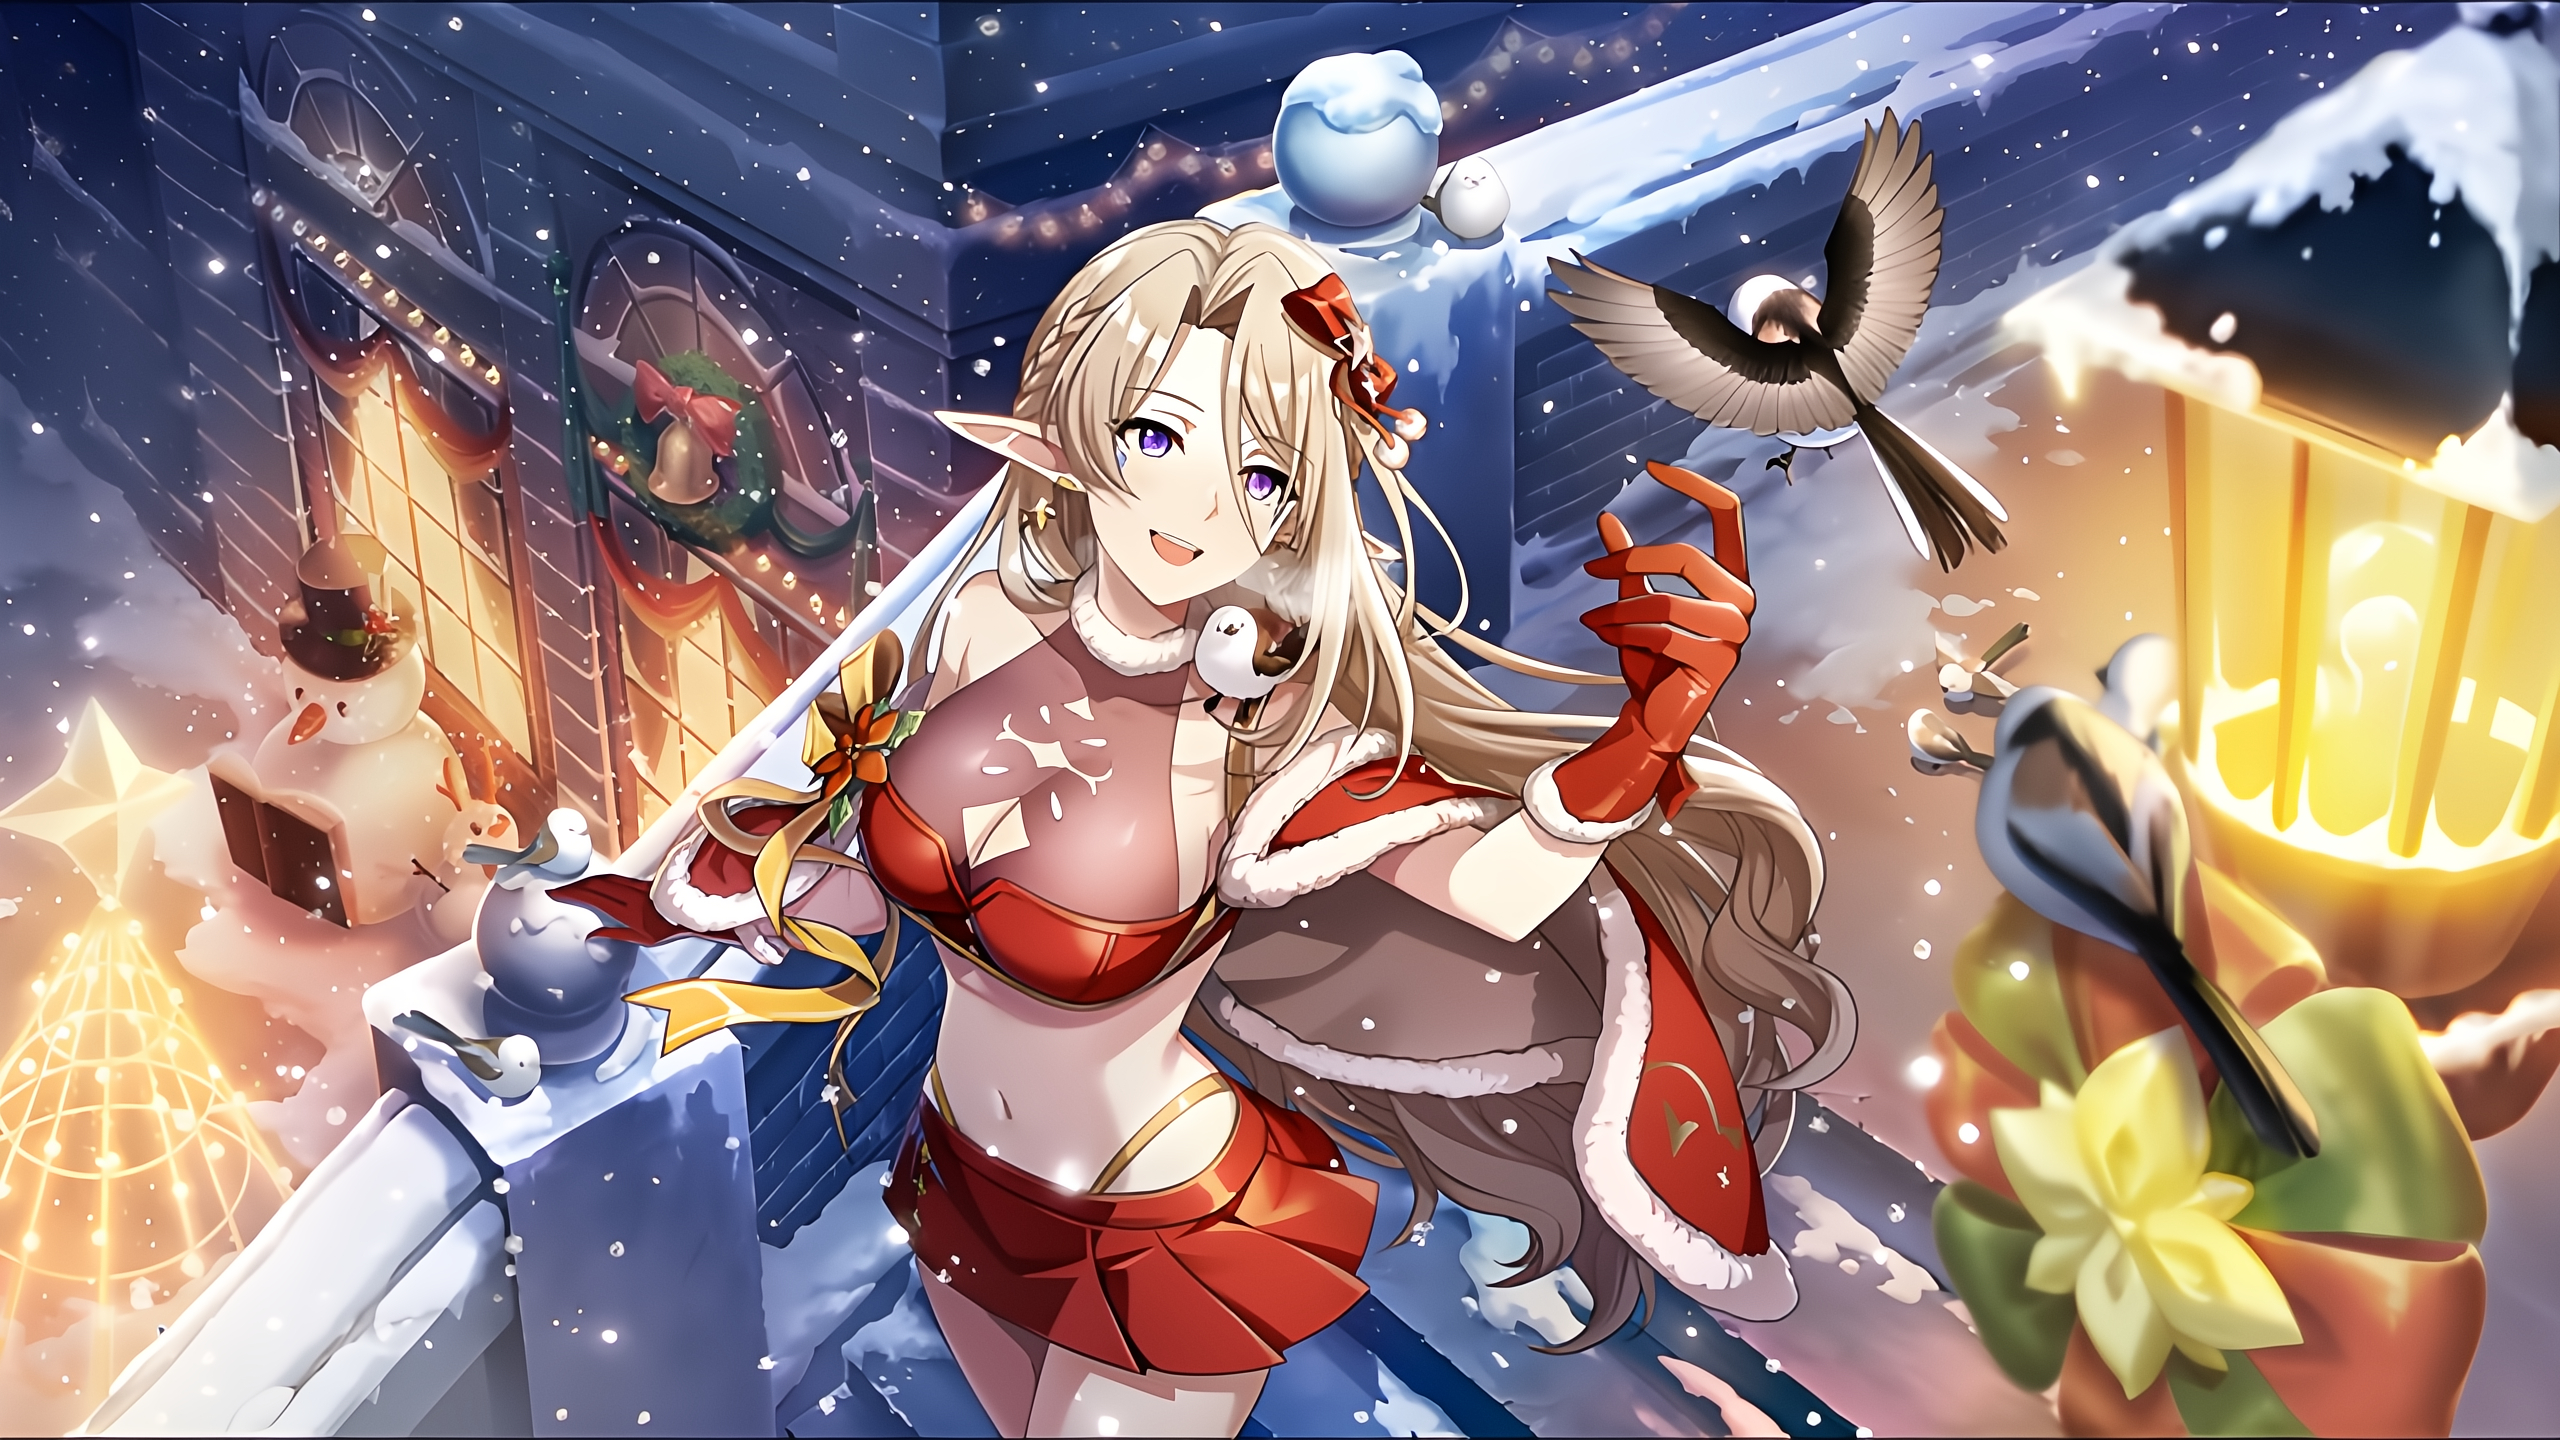 The Eminence In Shadow Beatrix The Eminence In Shadow Snow Red Clothing Smiling Anime Girls Looking  2560x1440